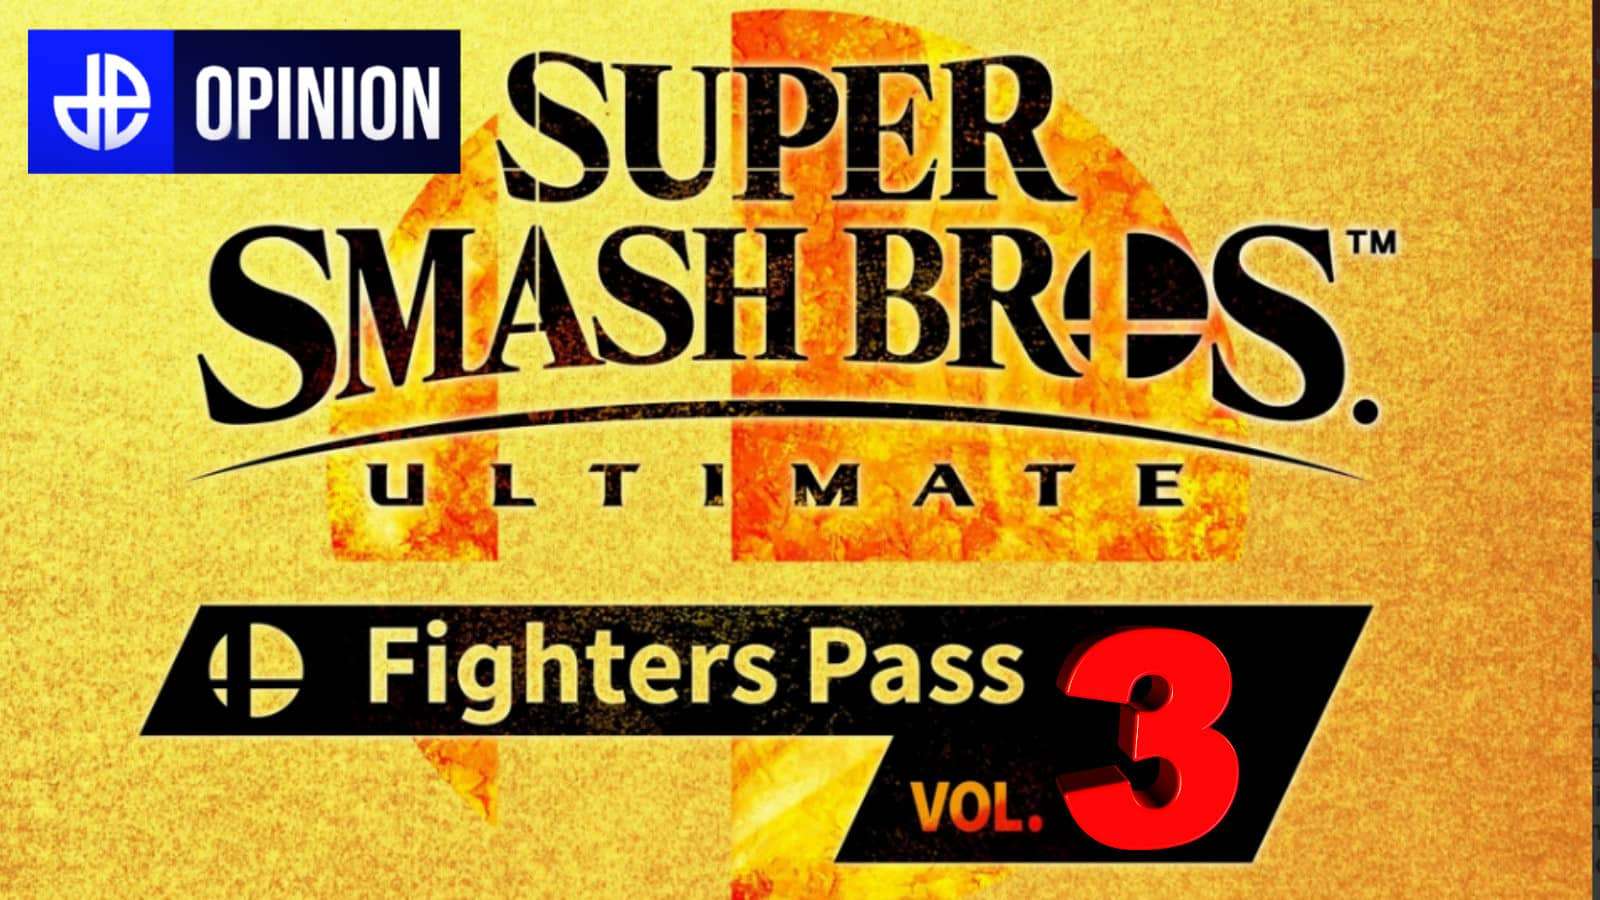 Fighters pass volume 3